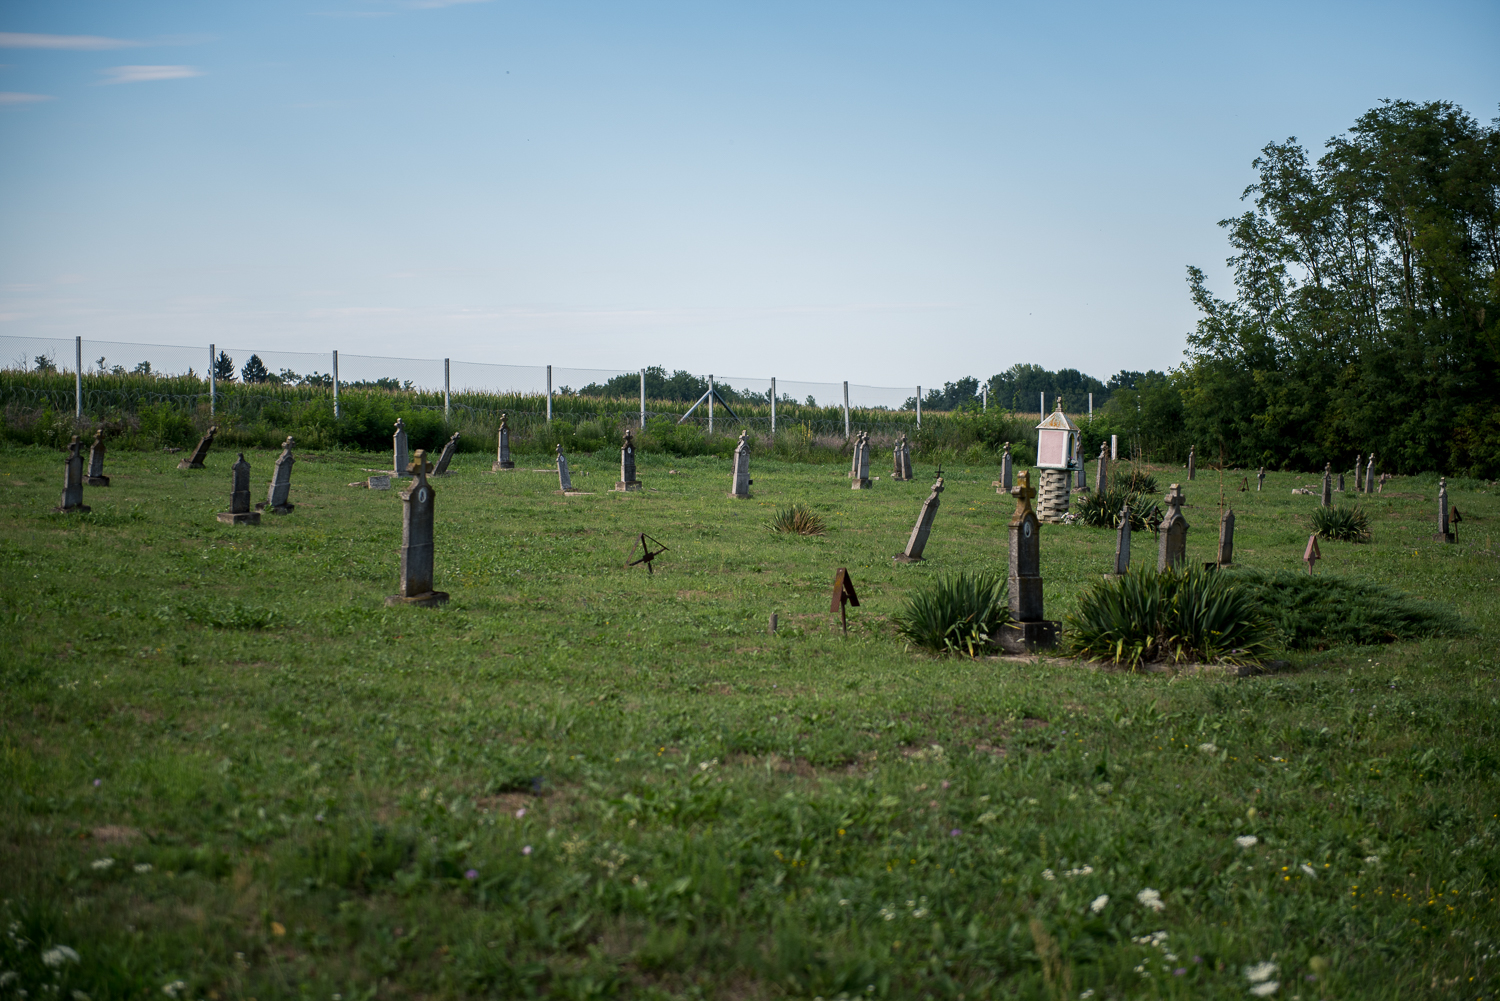  A cemetery in front of the Hungarian border barrier at the border between Hungary and Croatia at Luc, Croatia, 30 July 2017. The fence was constructed in the middle of the European migration crisis in 2015, with the aim to ensure border security by 